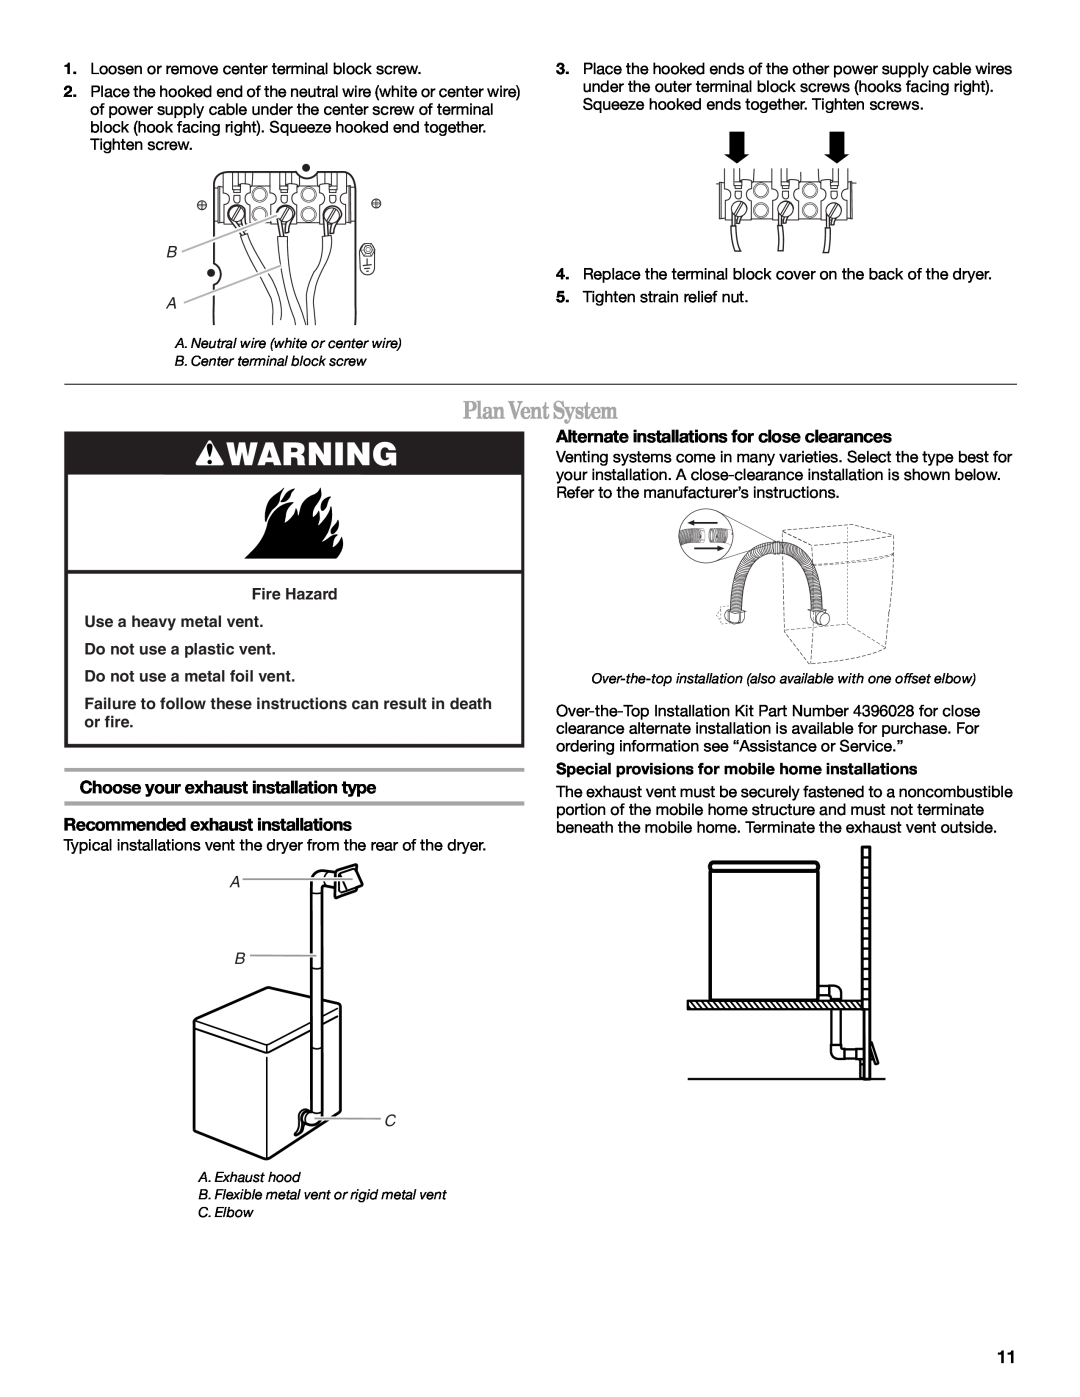 Whirlpool 8578567 manual Plan Vent System, Choose your exhaust installation type, Recommended exhaust installations, A B C 